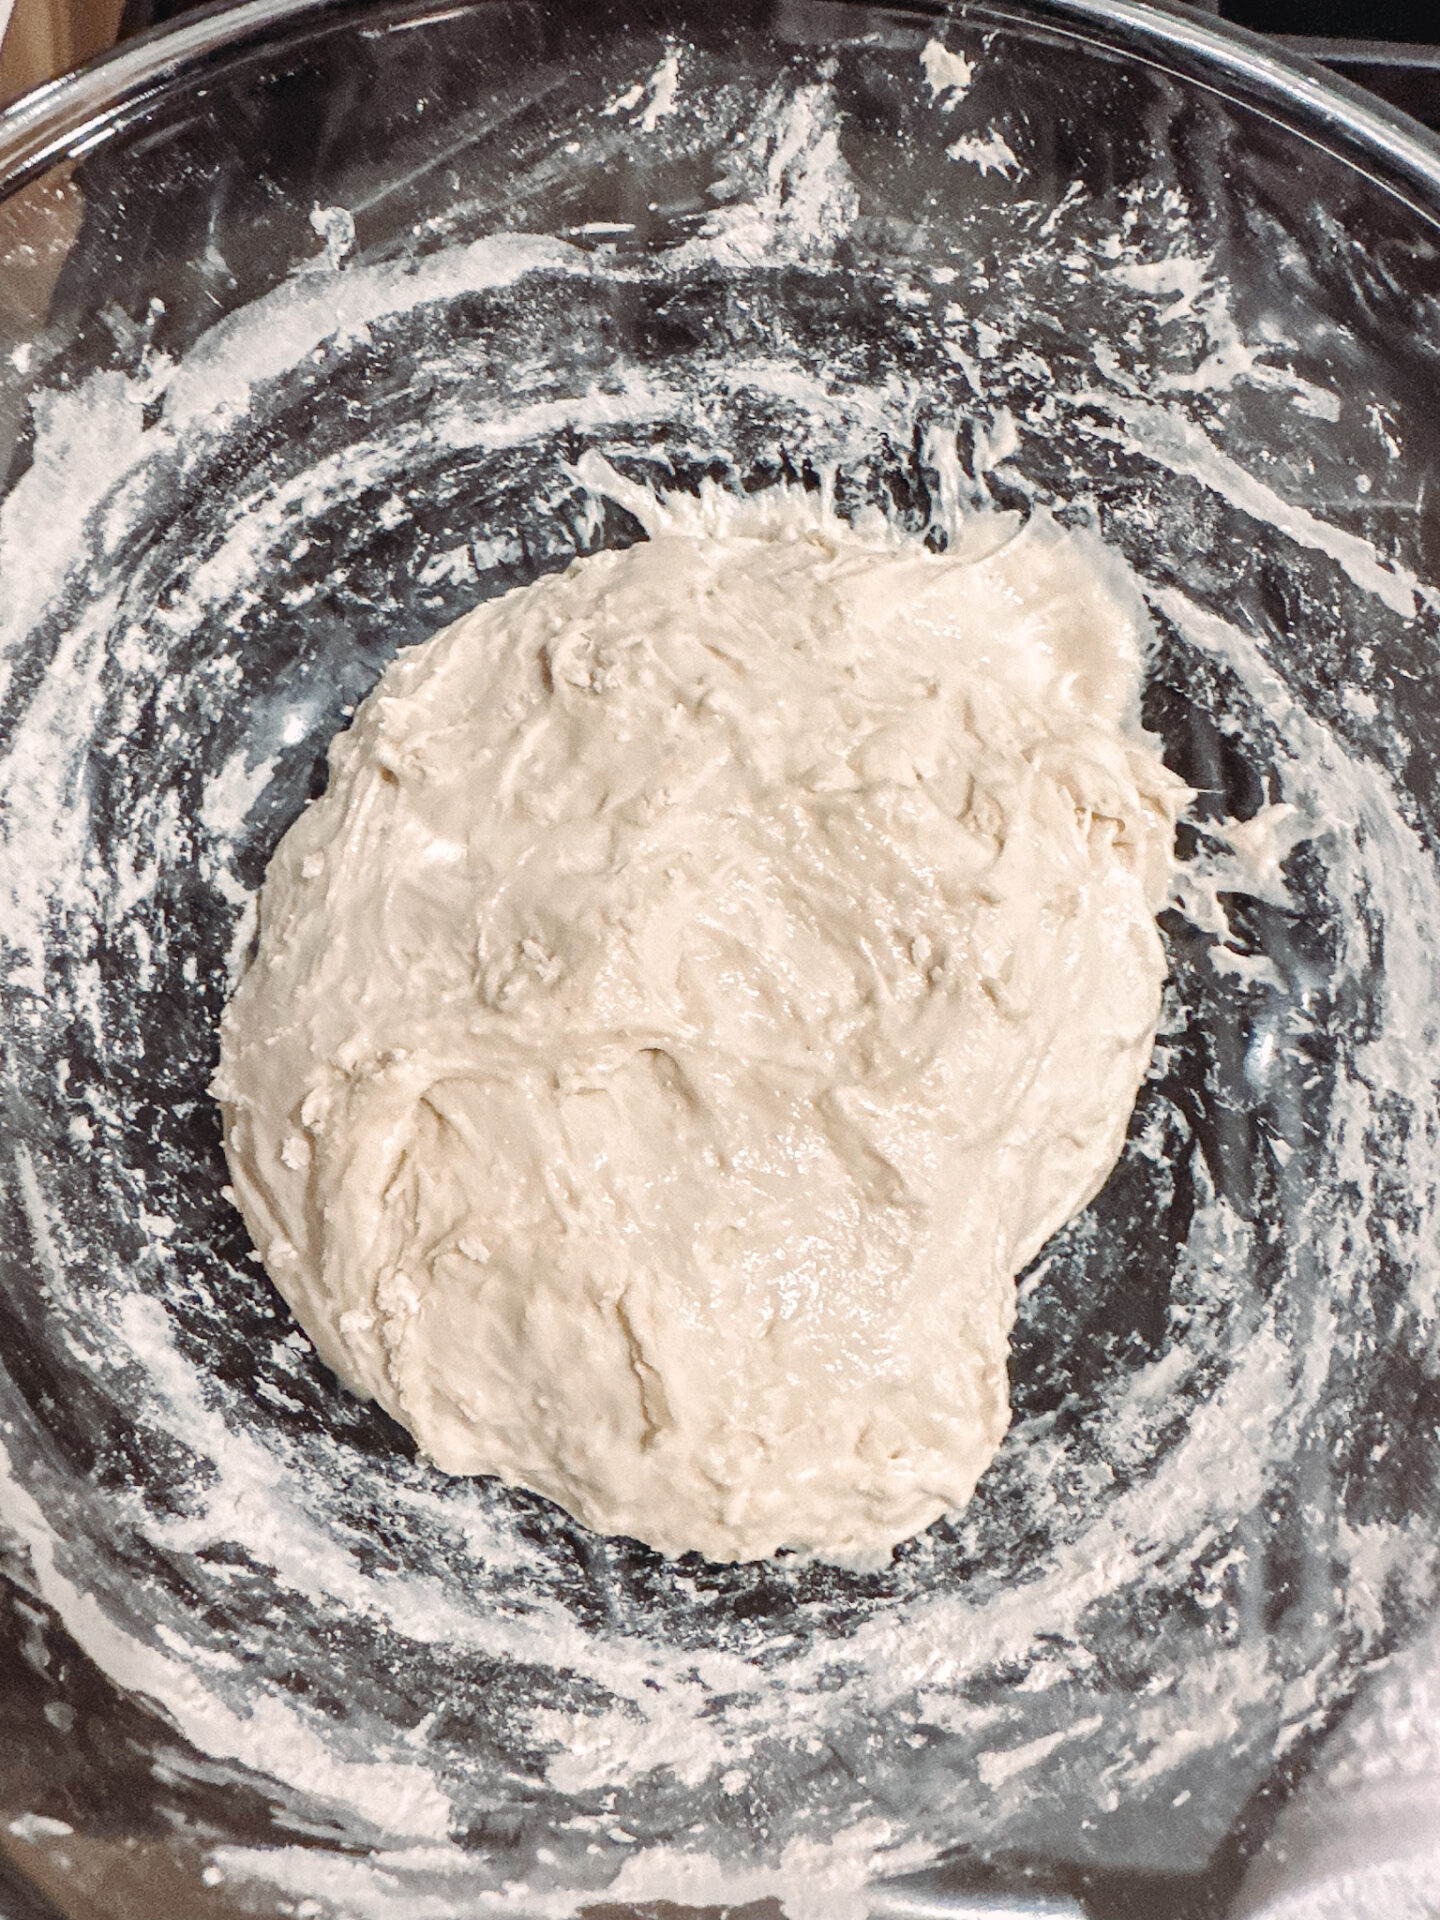 Sourdough baking tools you actually need by lifestyle blogger Angela Lanter